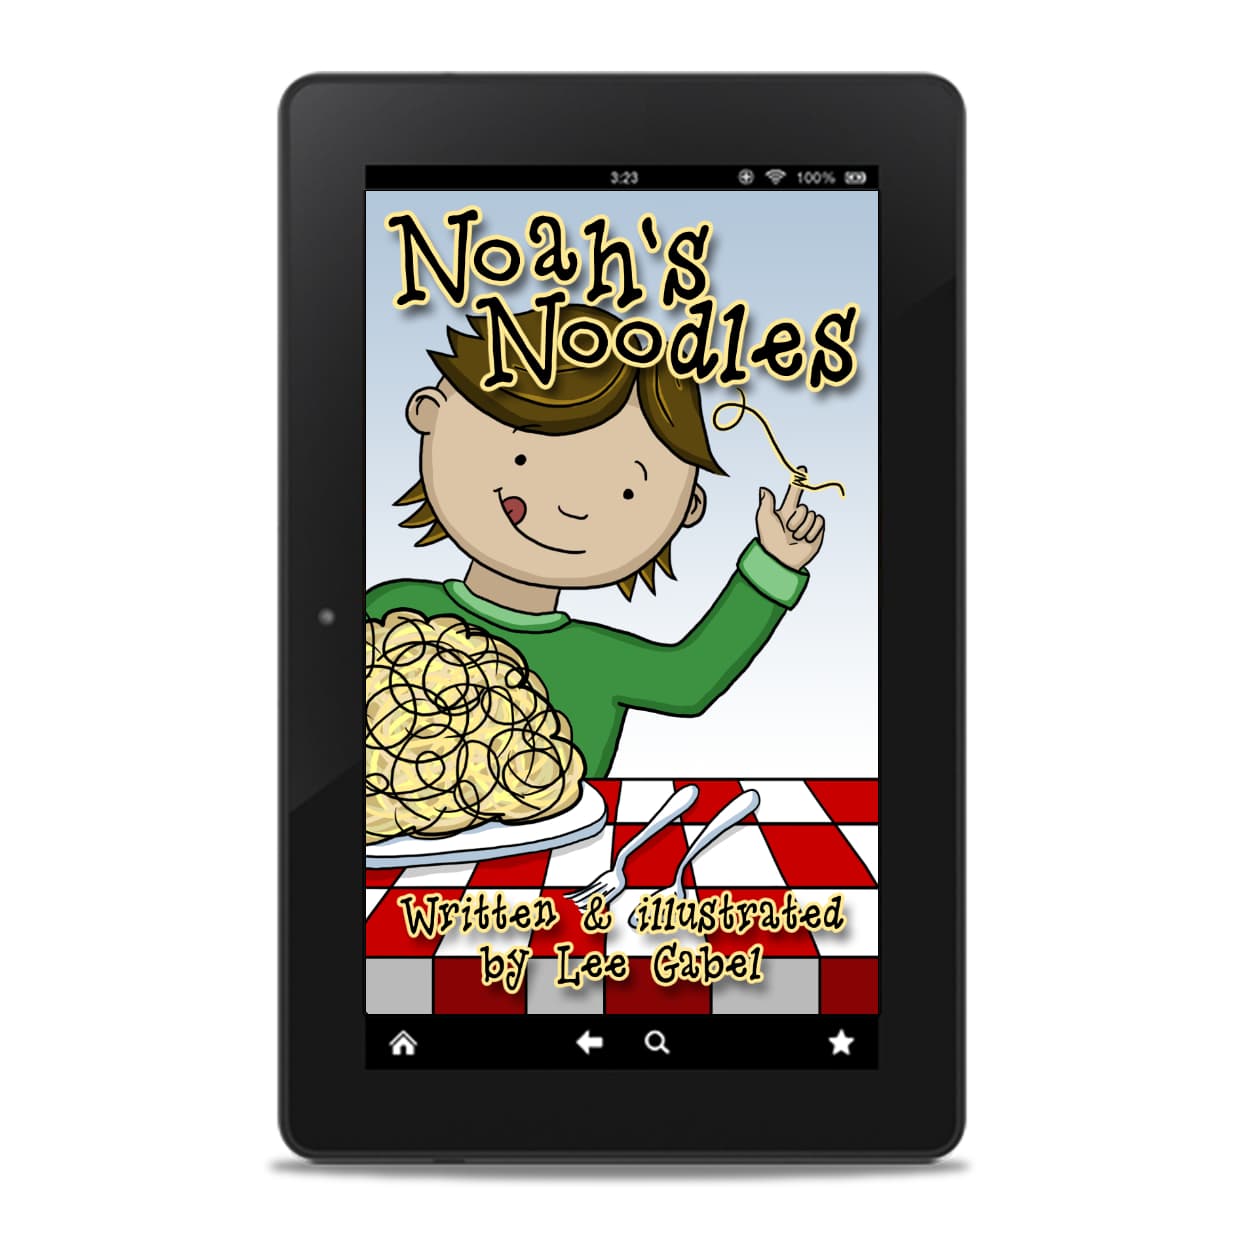 E-book cover of Noah's Noodles displayed on an e-reader.